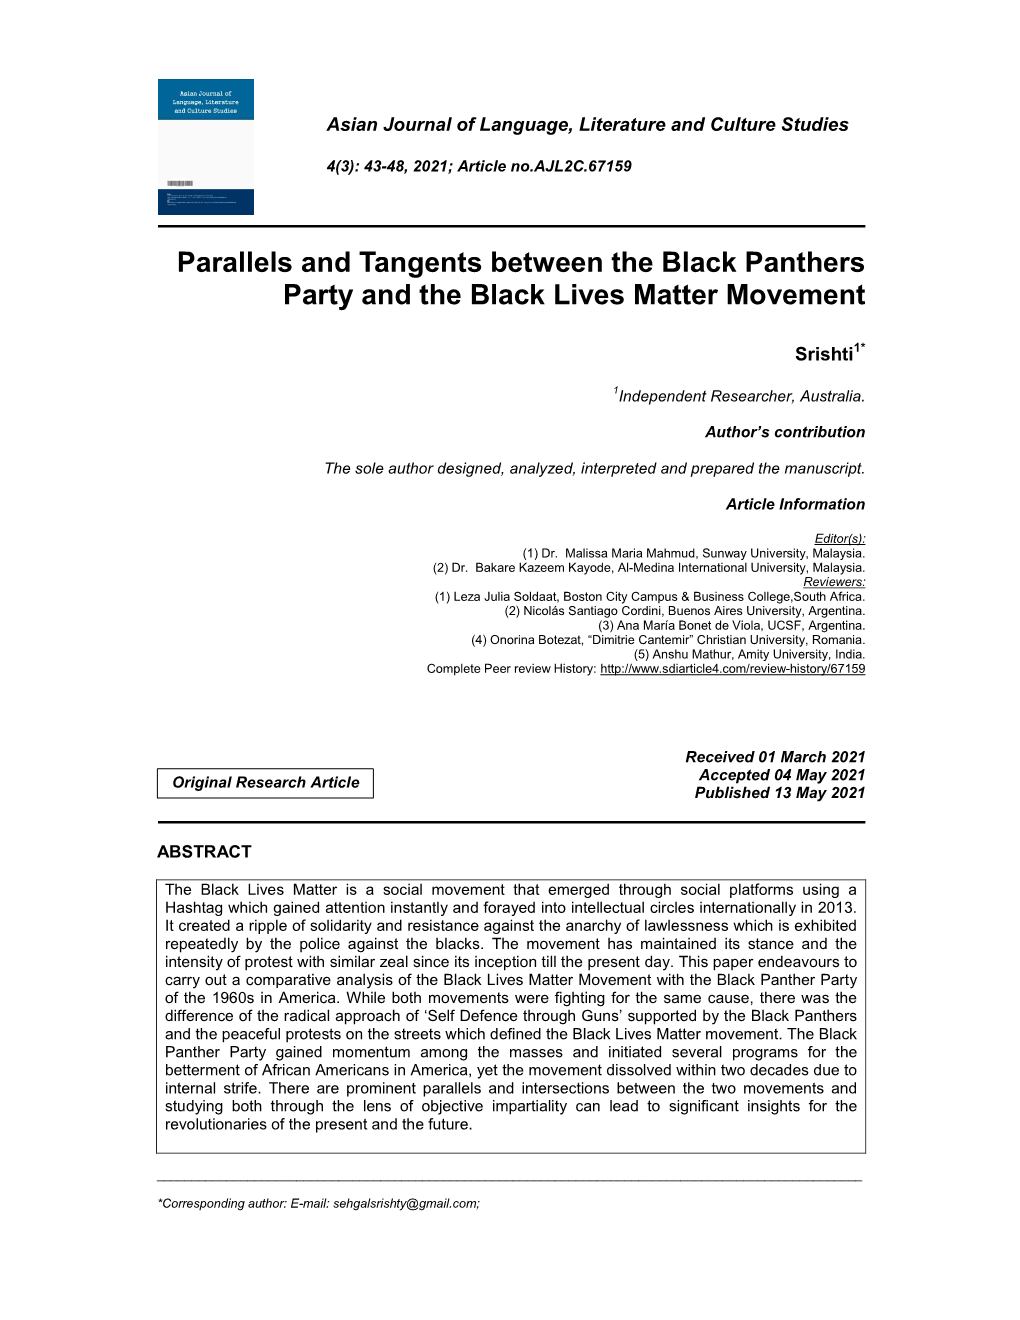 Parallels and Tangents Between the Black Panthers Party and the Black Lives Matter Movement